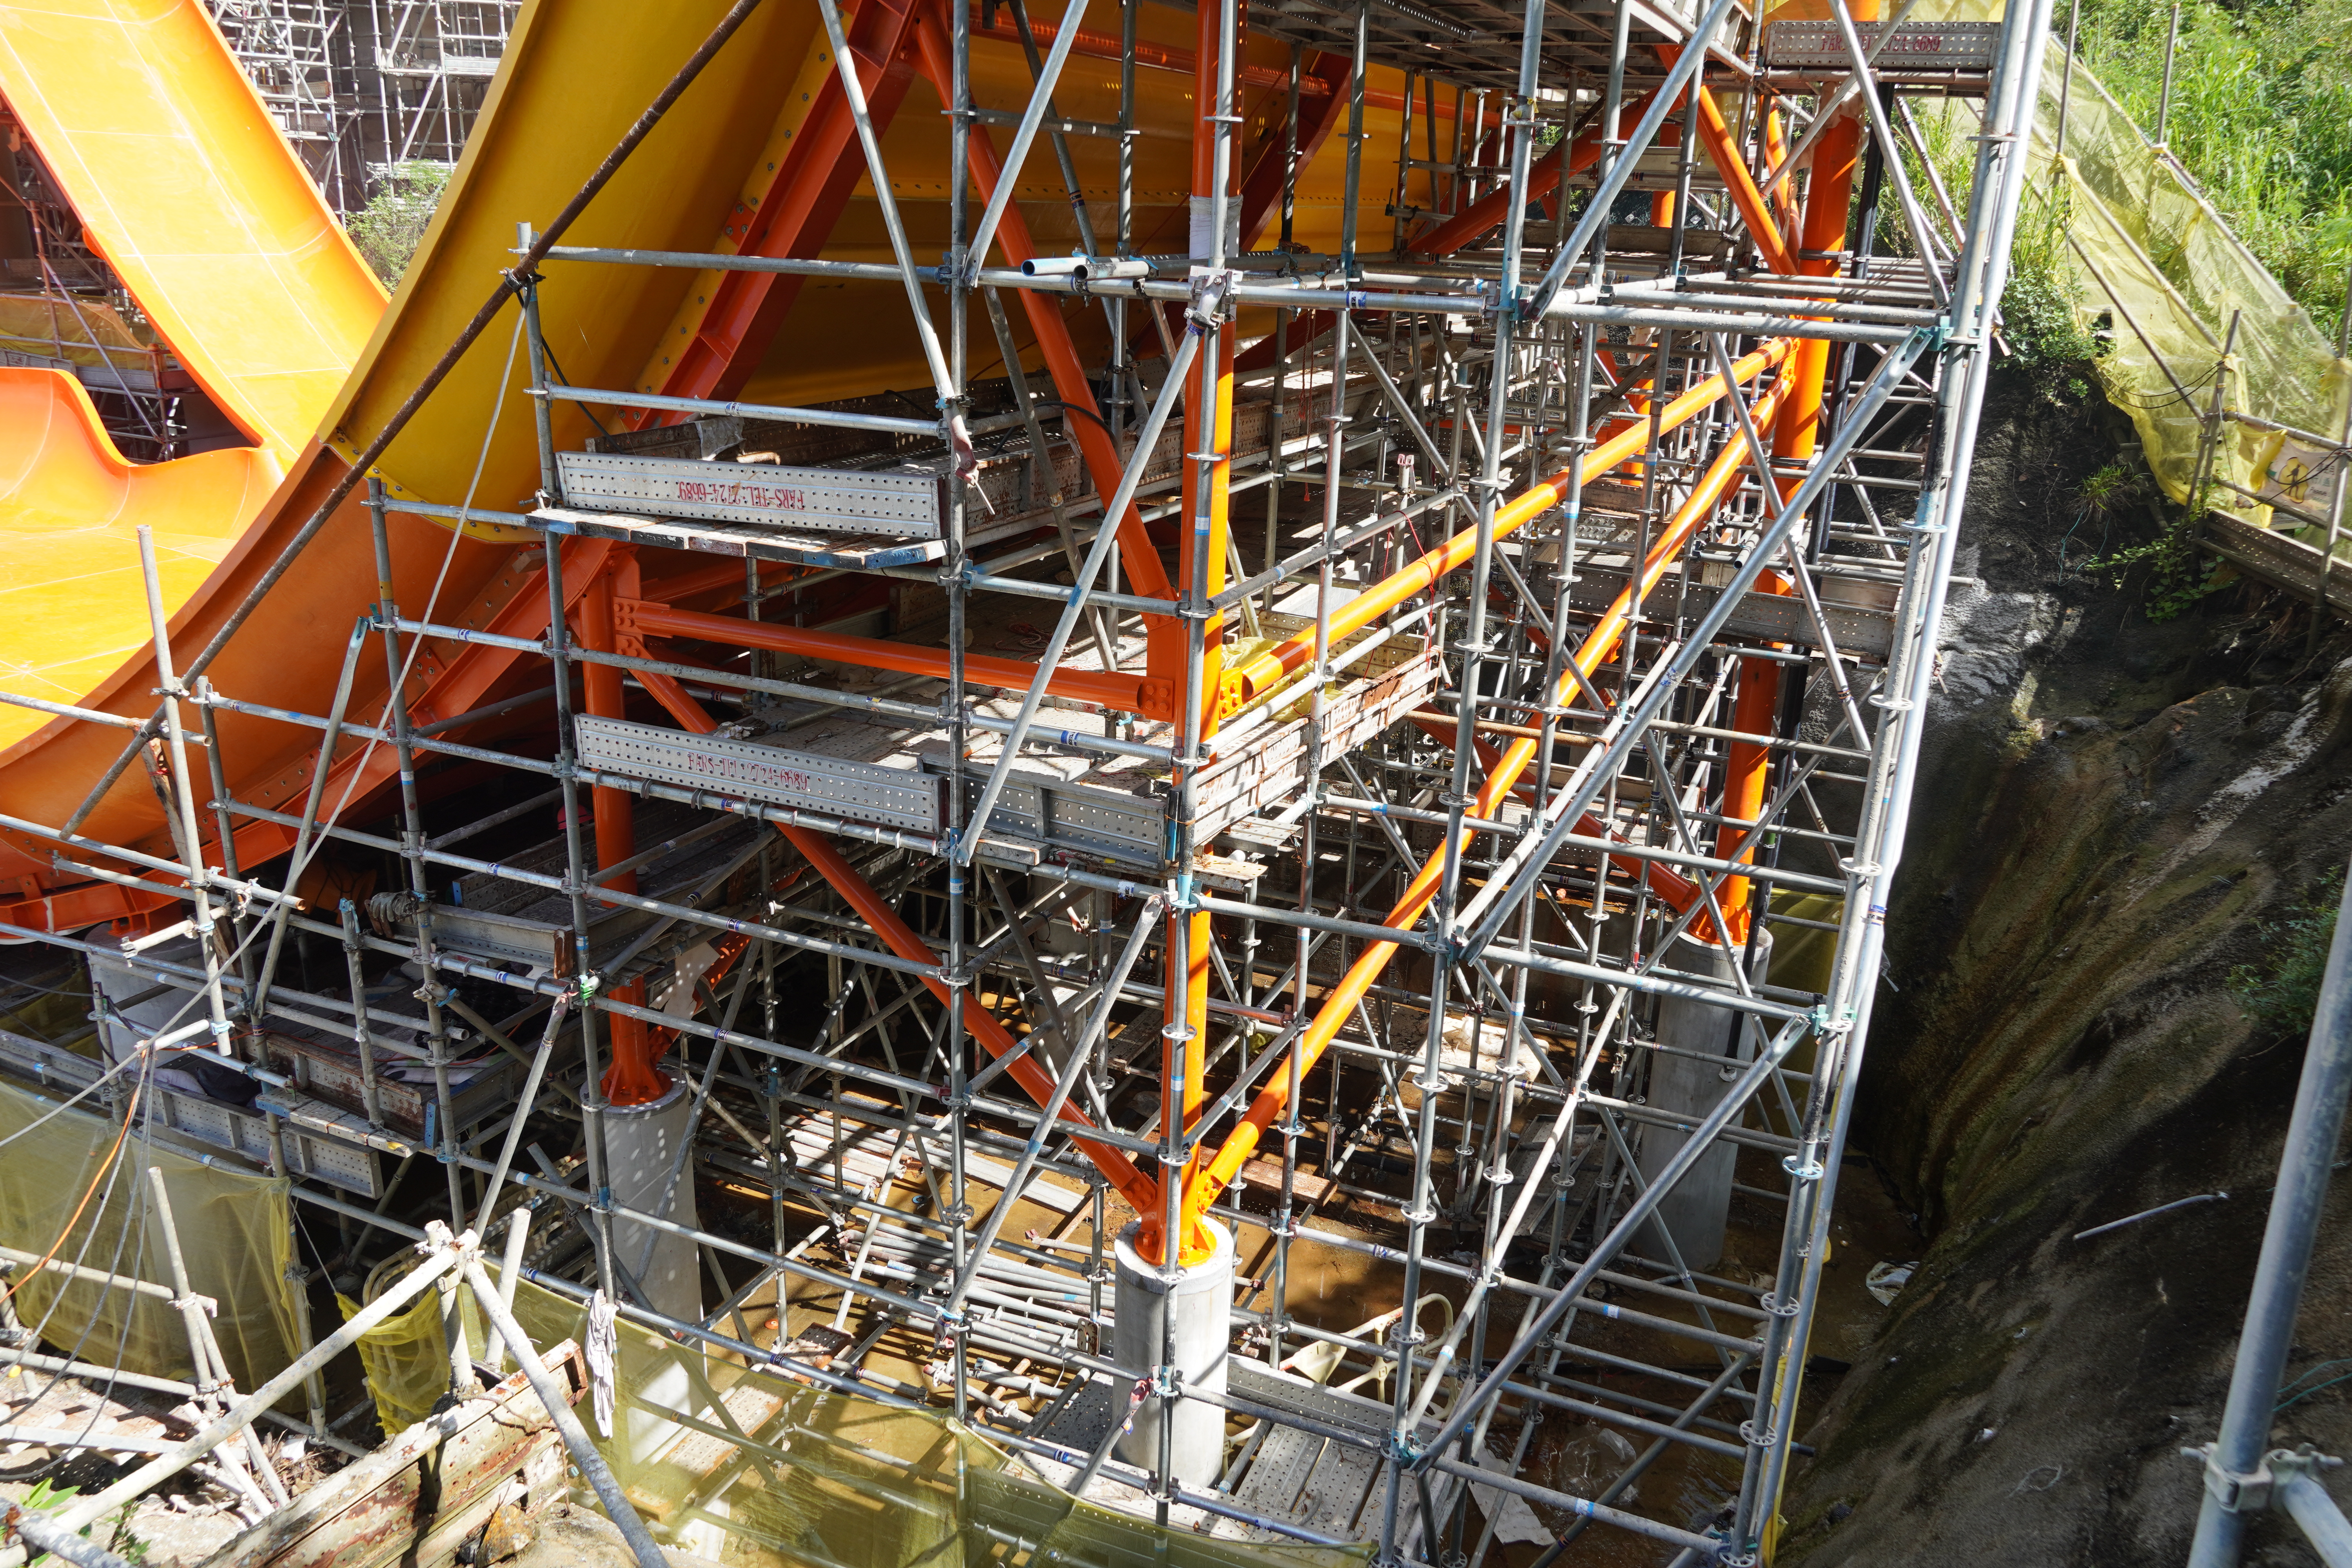 Design, Supply, Erection and Dismantle of Scaffolding Works for wall and columns for Contract No. TSW-C006, Waterpark- Main Building Works